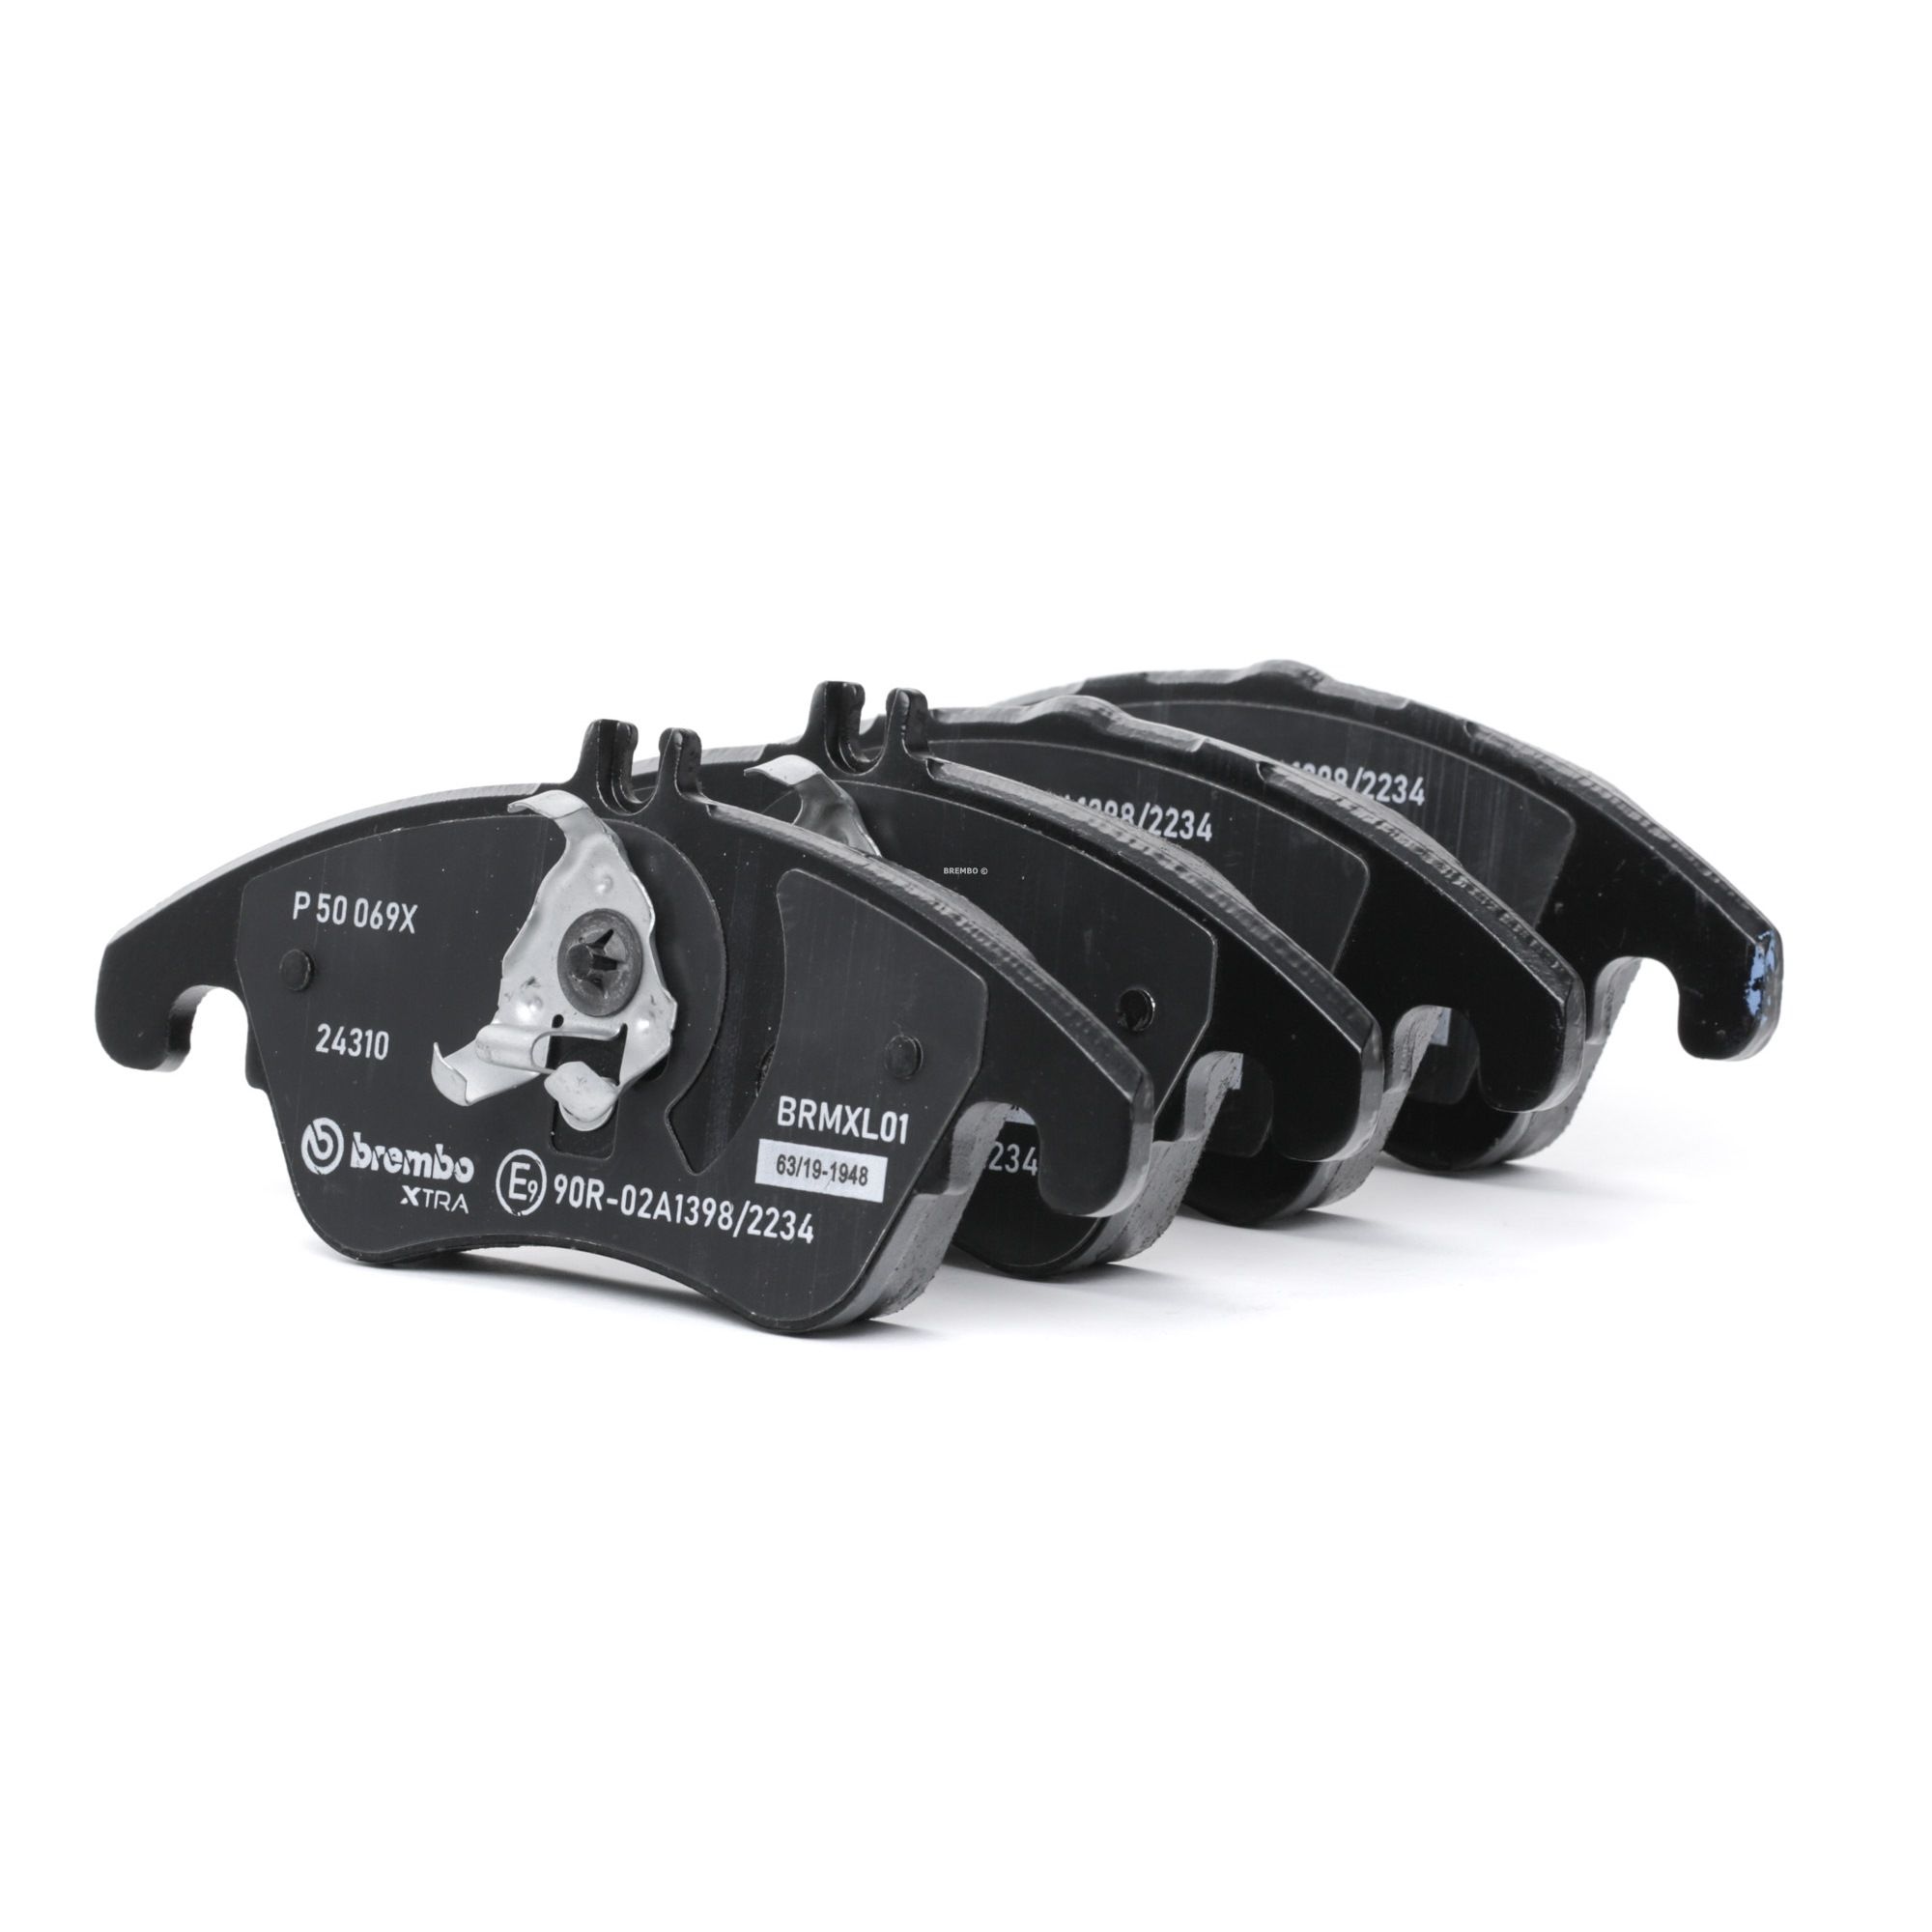 BREMBO P 50 069X Brake pad set prepared for wear indicator, with piston clip, with anti-squeak plate, with brake caliper screws, without accessories